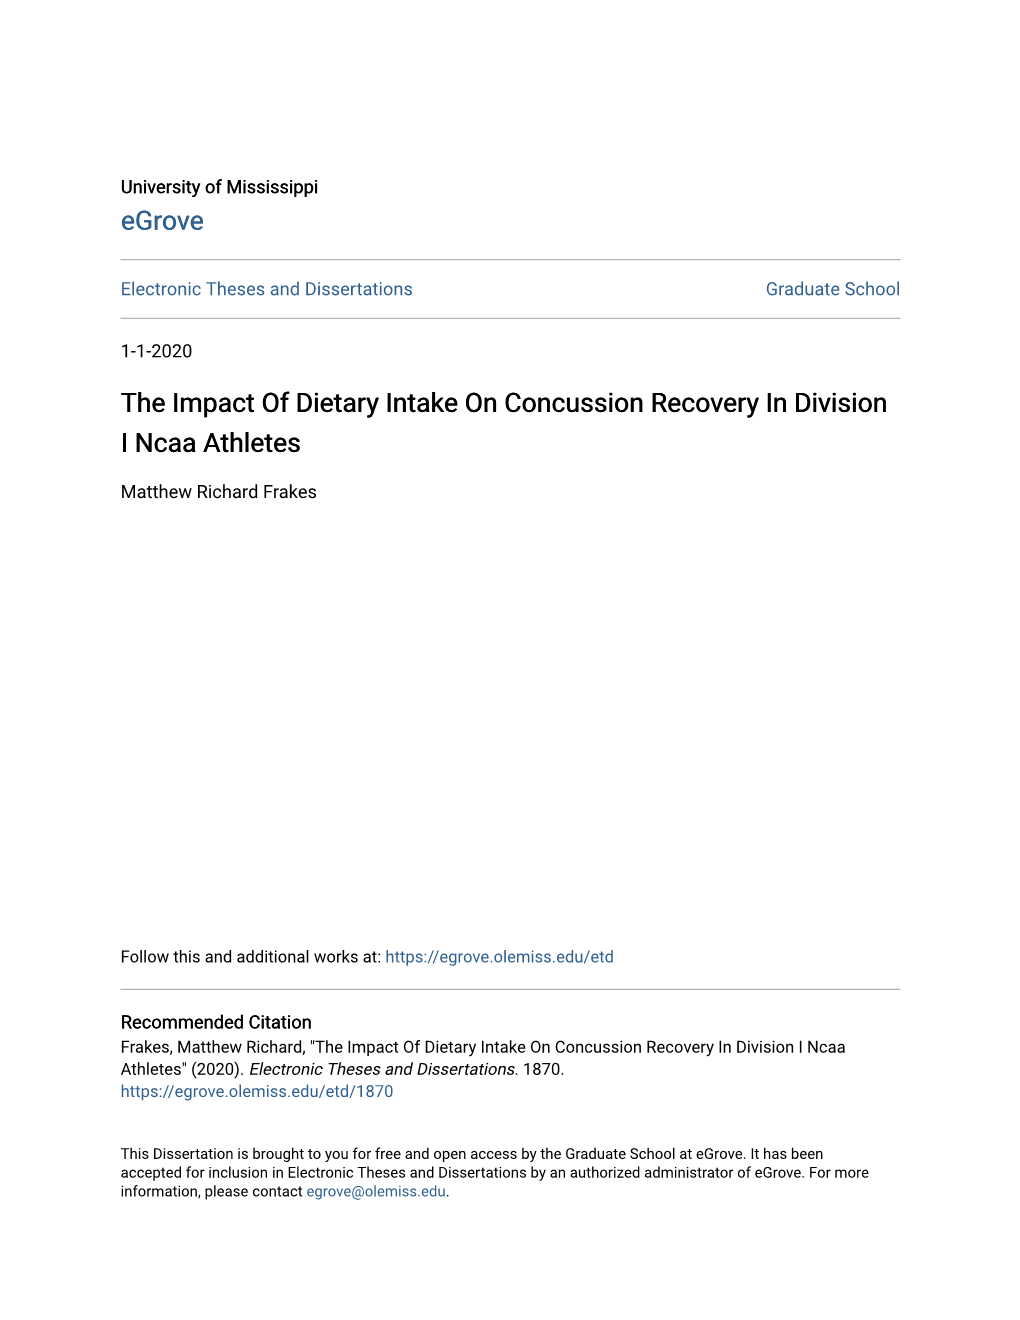 The Impact of Dietary Intake on Concussion Recovery in Division I Ncaa Athletes